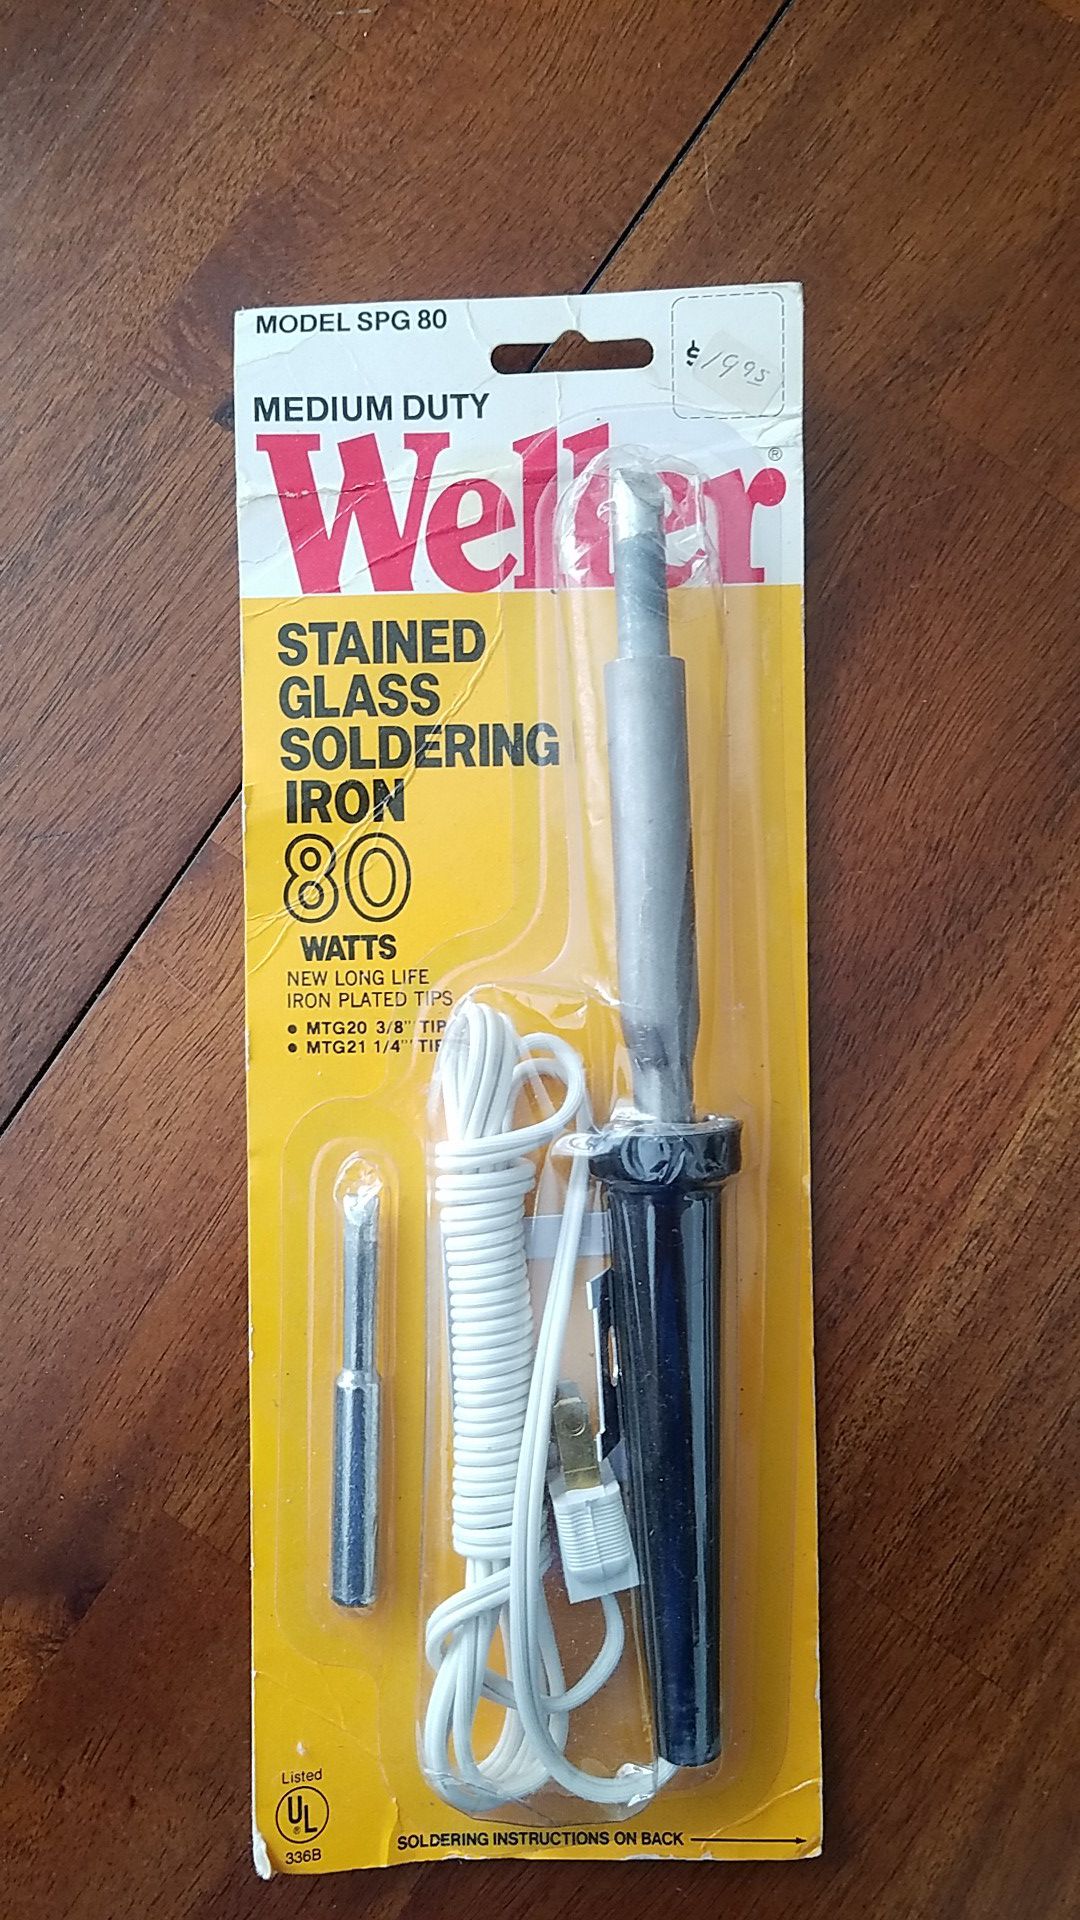 NEW Weller Stained Glass Soldering Iron 80 Watts. MPU